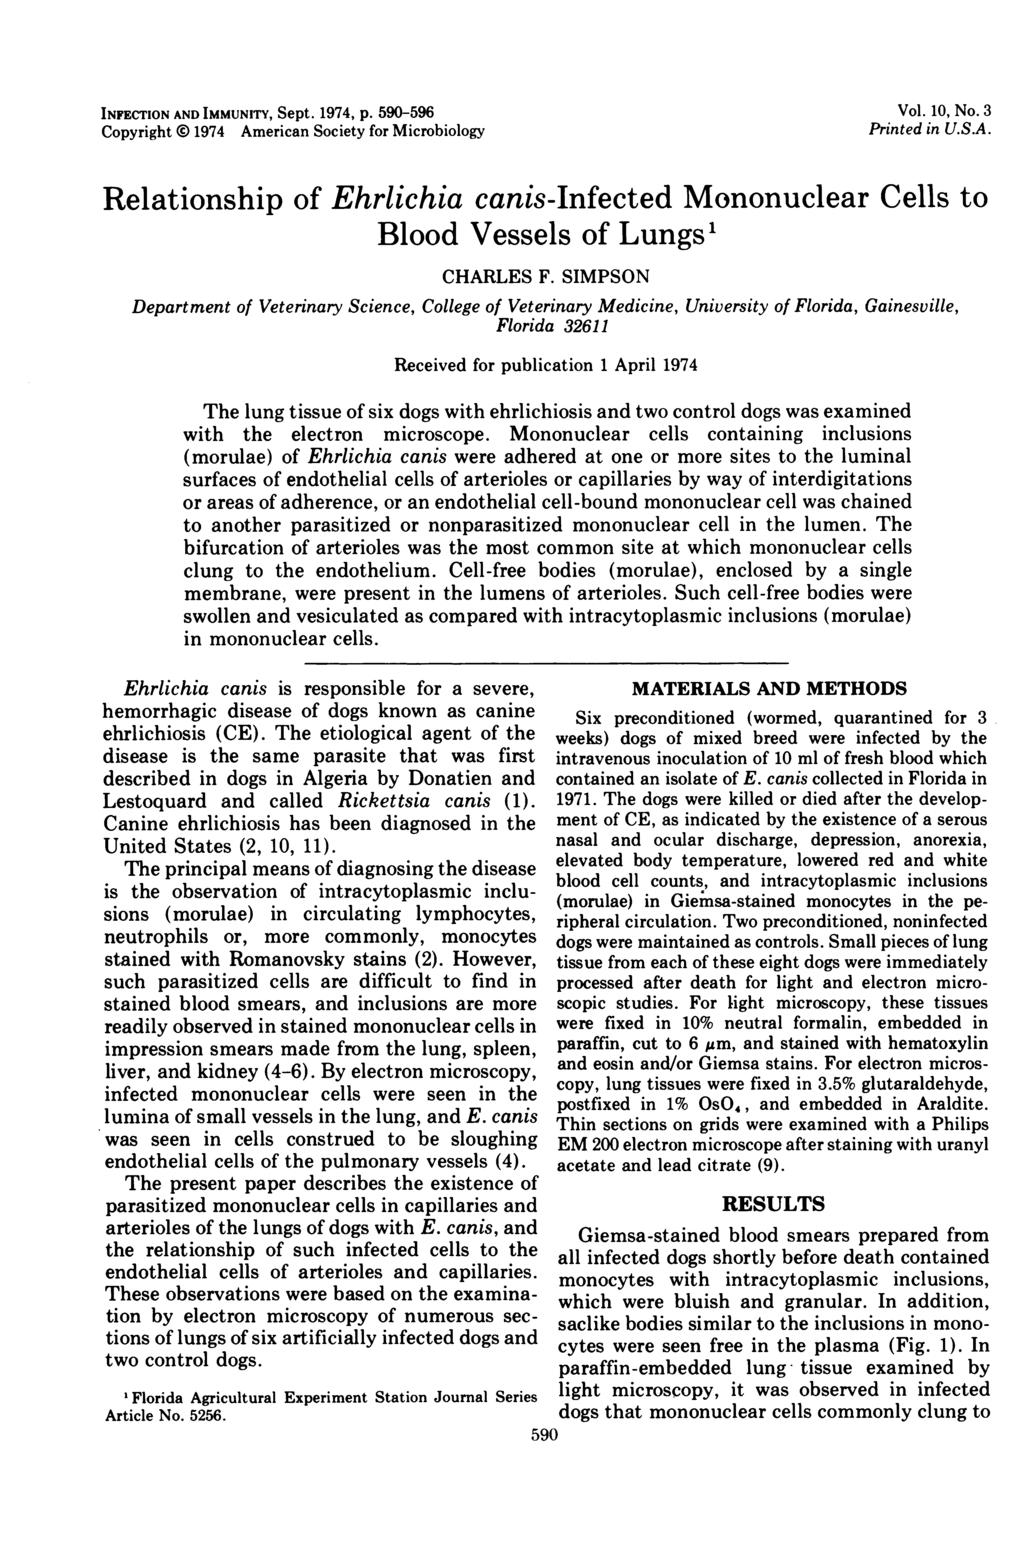 INFECTION AND IMMUNITY, Sept. 1974, p. 590-596 Copyright 0 1974 American Society for Microbiology Vol. 10, No. 3 Printed in U.S.A. Relationship of Ehrlichia canis-infected Mononuclear Cells to Blood Vessels of Lungs1 CHARLES F.